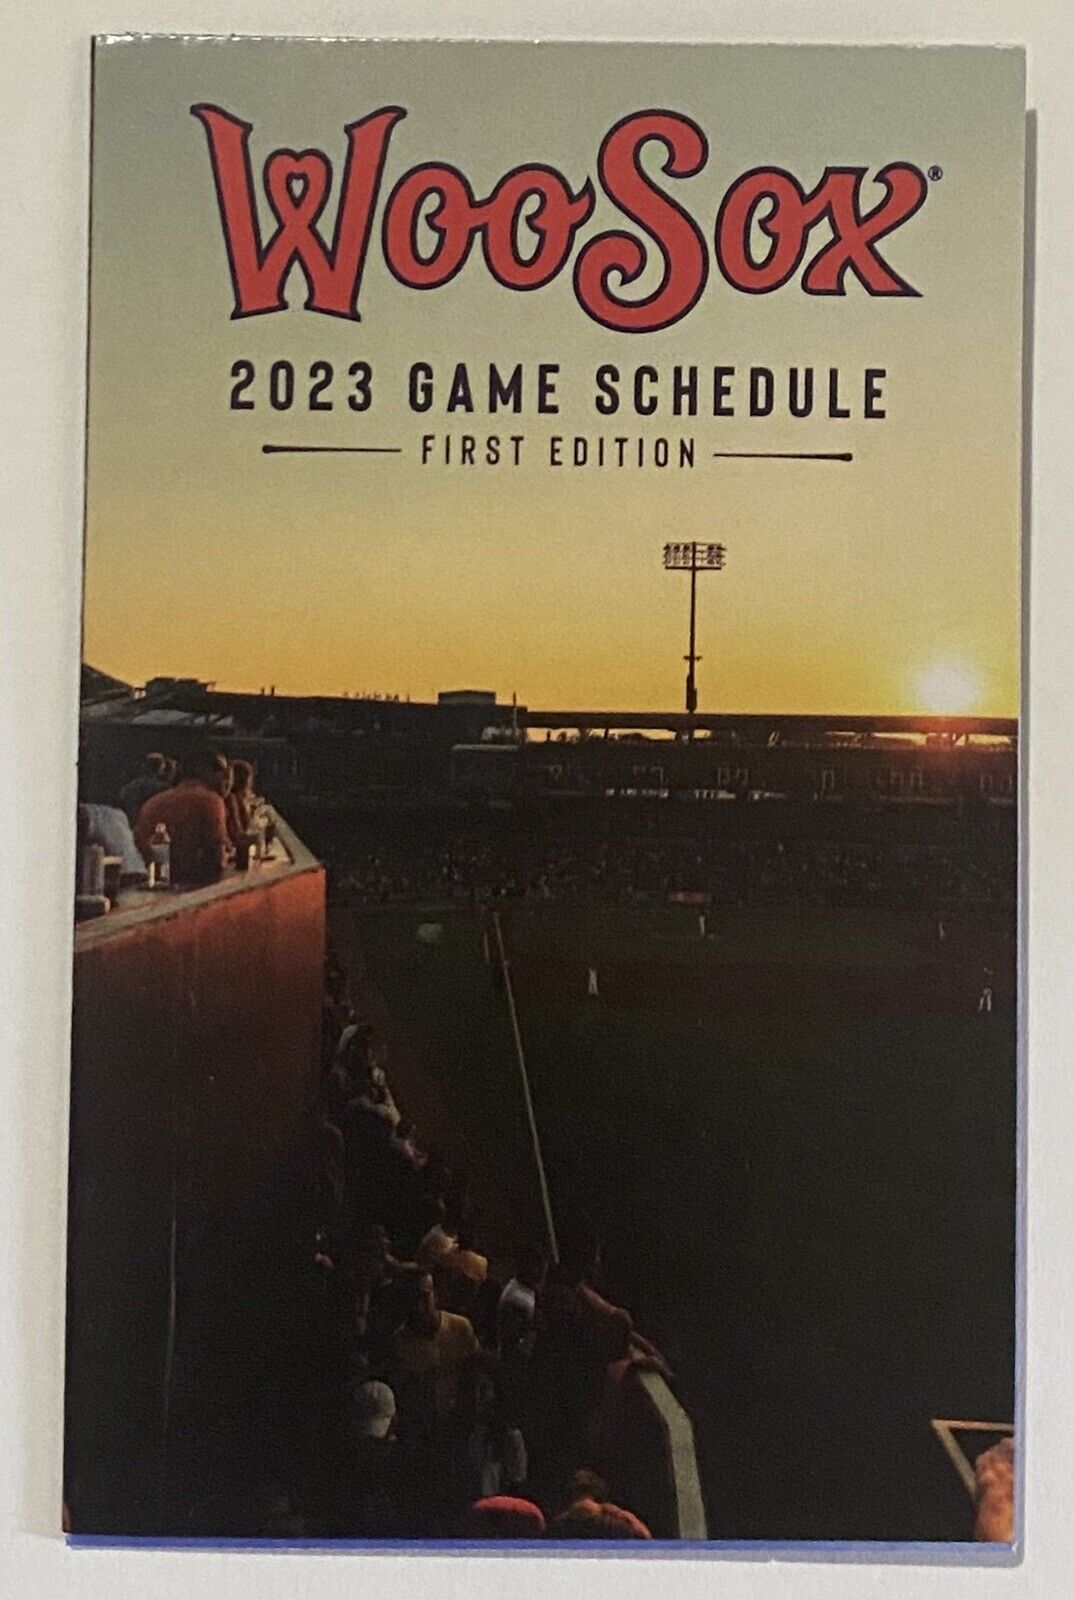 2023 Worcester Red Sox Schedule ⚾️ Cool Minor Baseball Sked ⚾️ Woosox ‼️not 2022